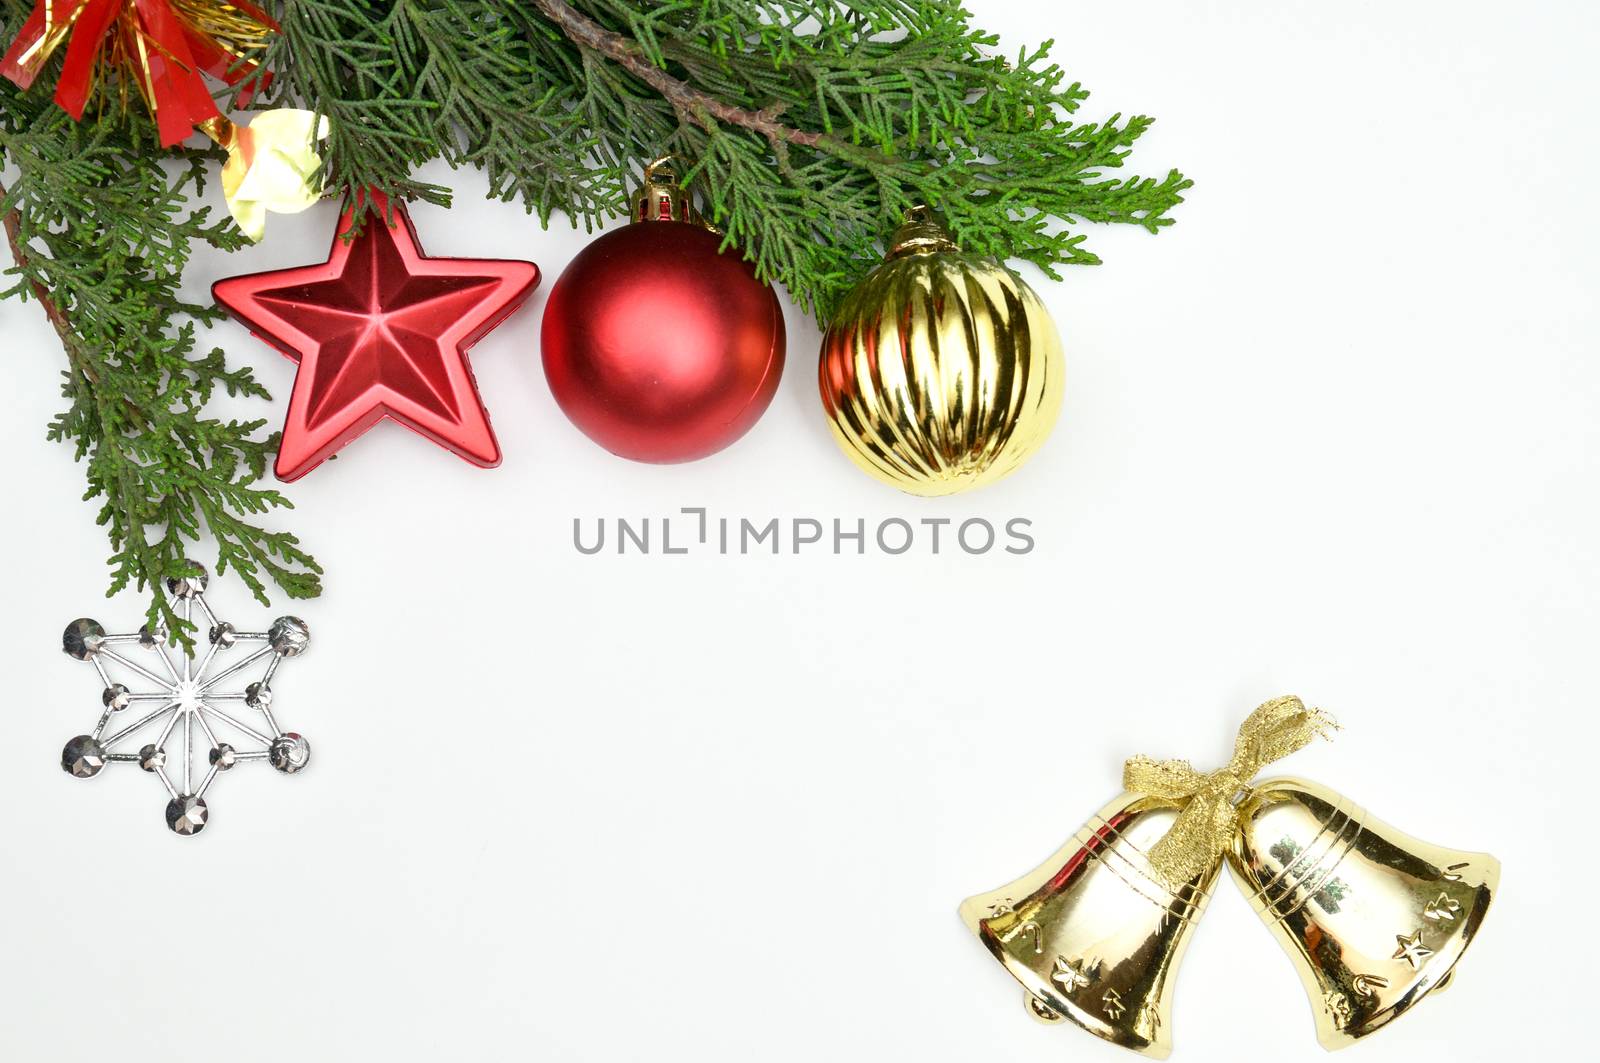 New Year and Christmas backgrounds ror isolation and design by moviephoto